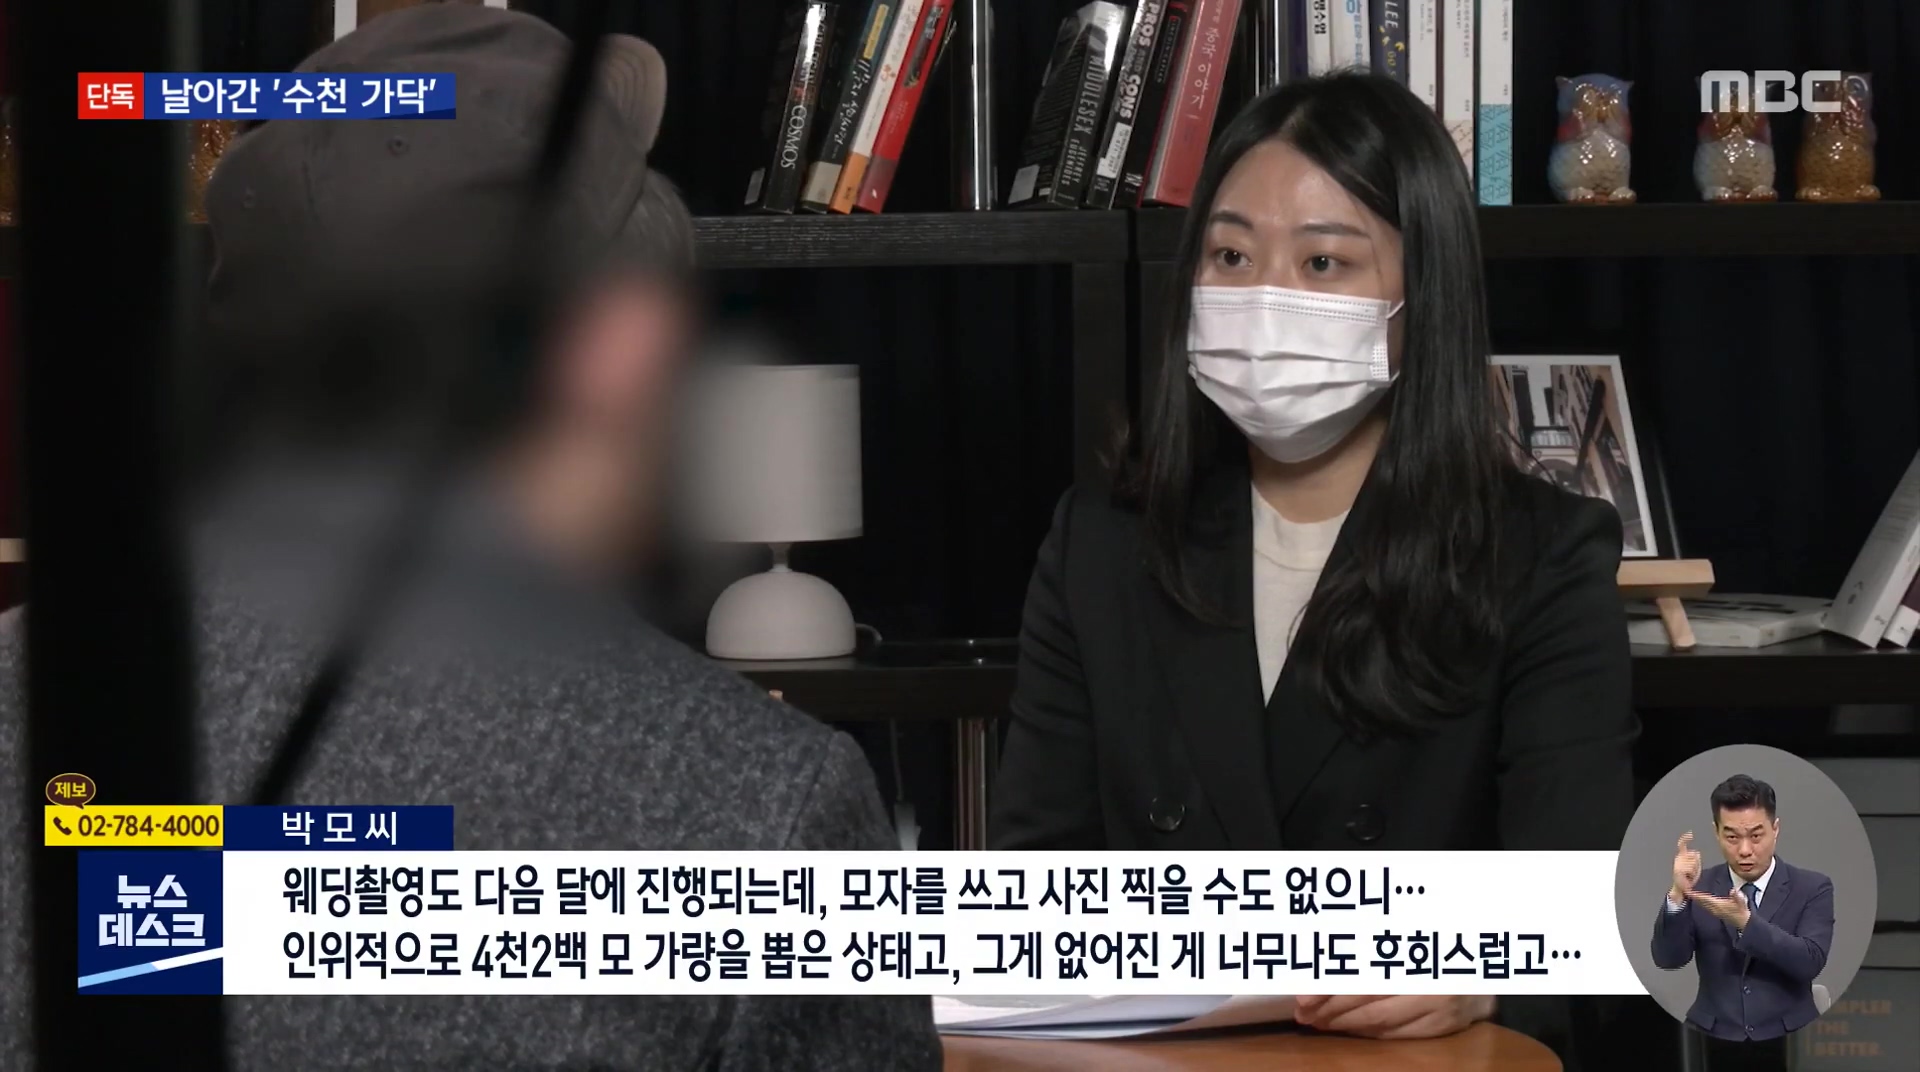 Hair loss patient who underwent a hair transplant surgery 멀 A hospital that lost 4,000 normal hair and said it's over with a refund.